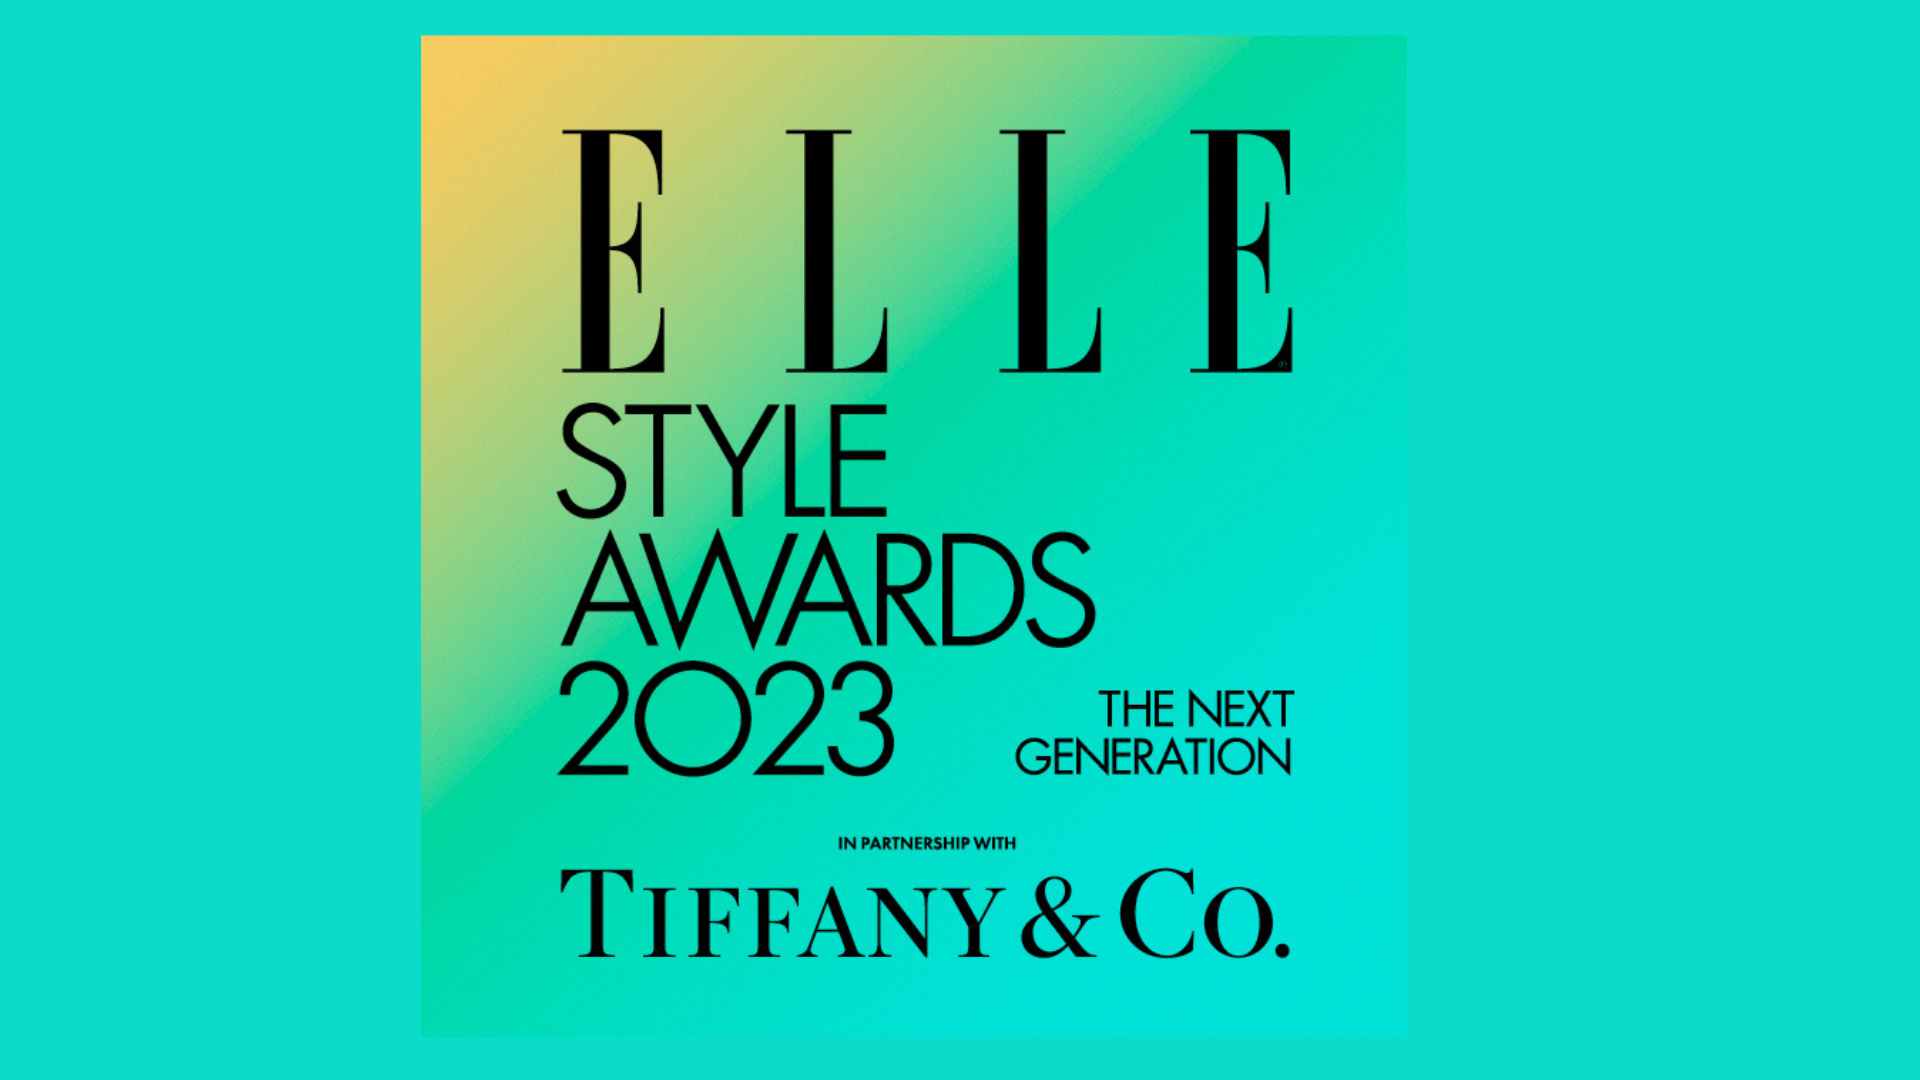 The ELLE Style Awards returns with Tiffany & Co. as headline partner